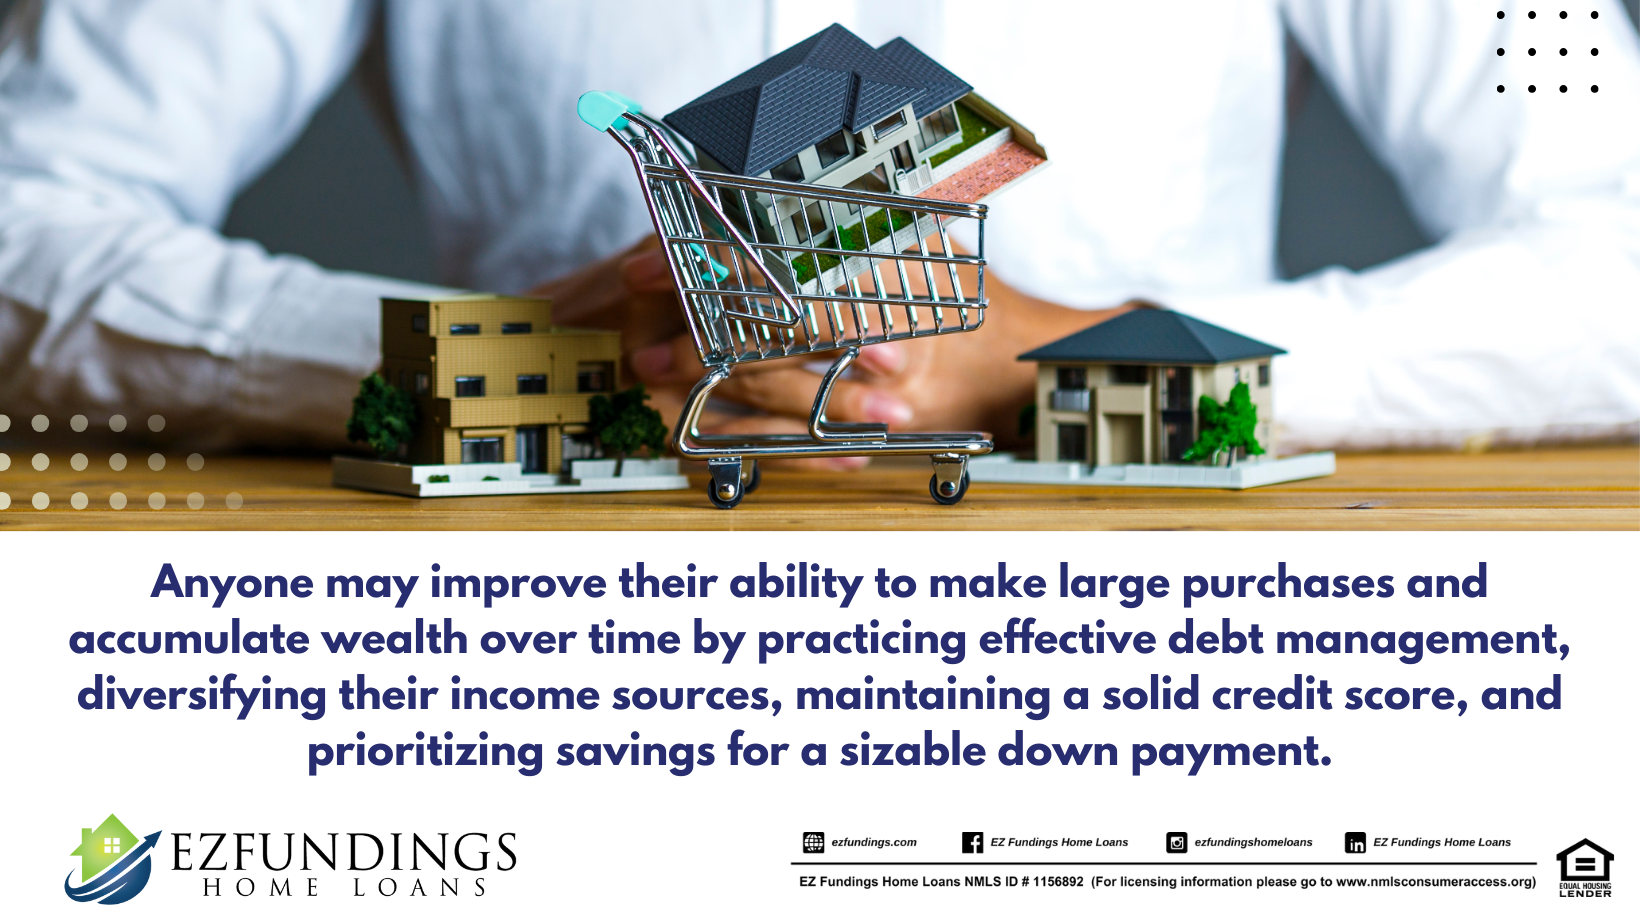 Strategies to Boost Purchasing Power: Manage debt, diversify income, maintain good credit, prioritize down payment for financial stability.